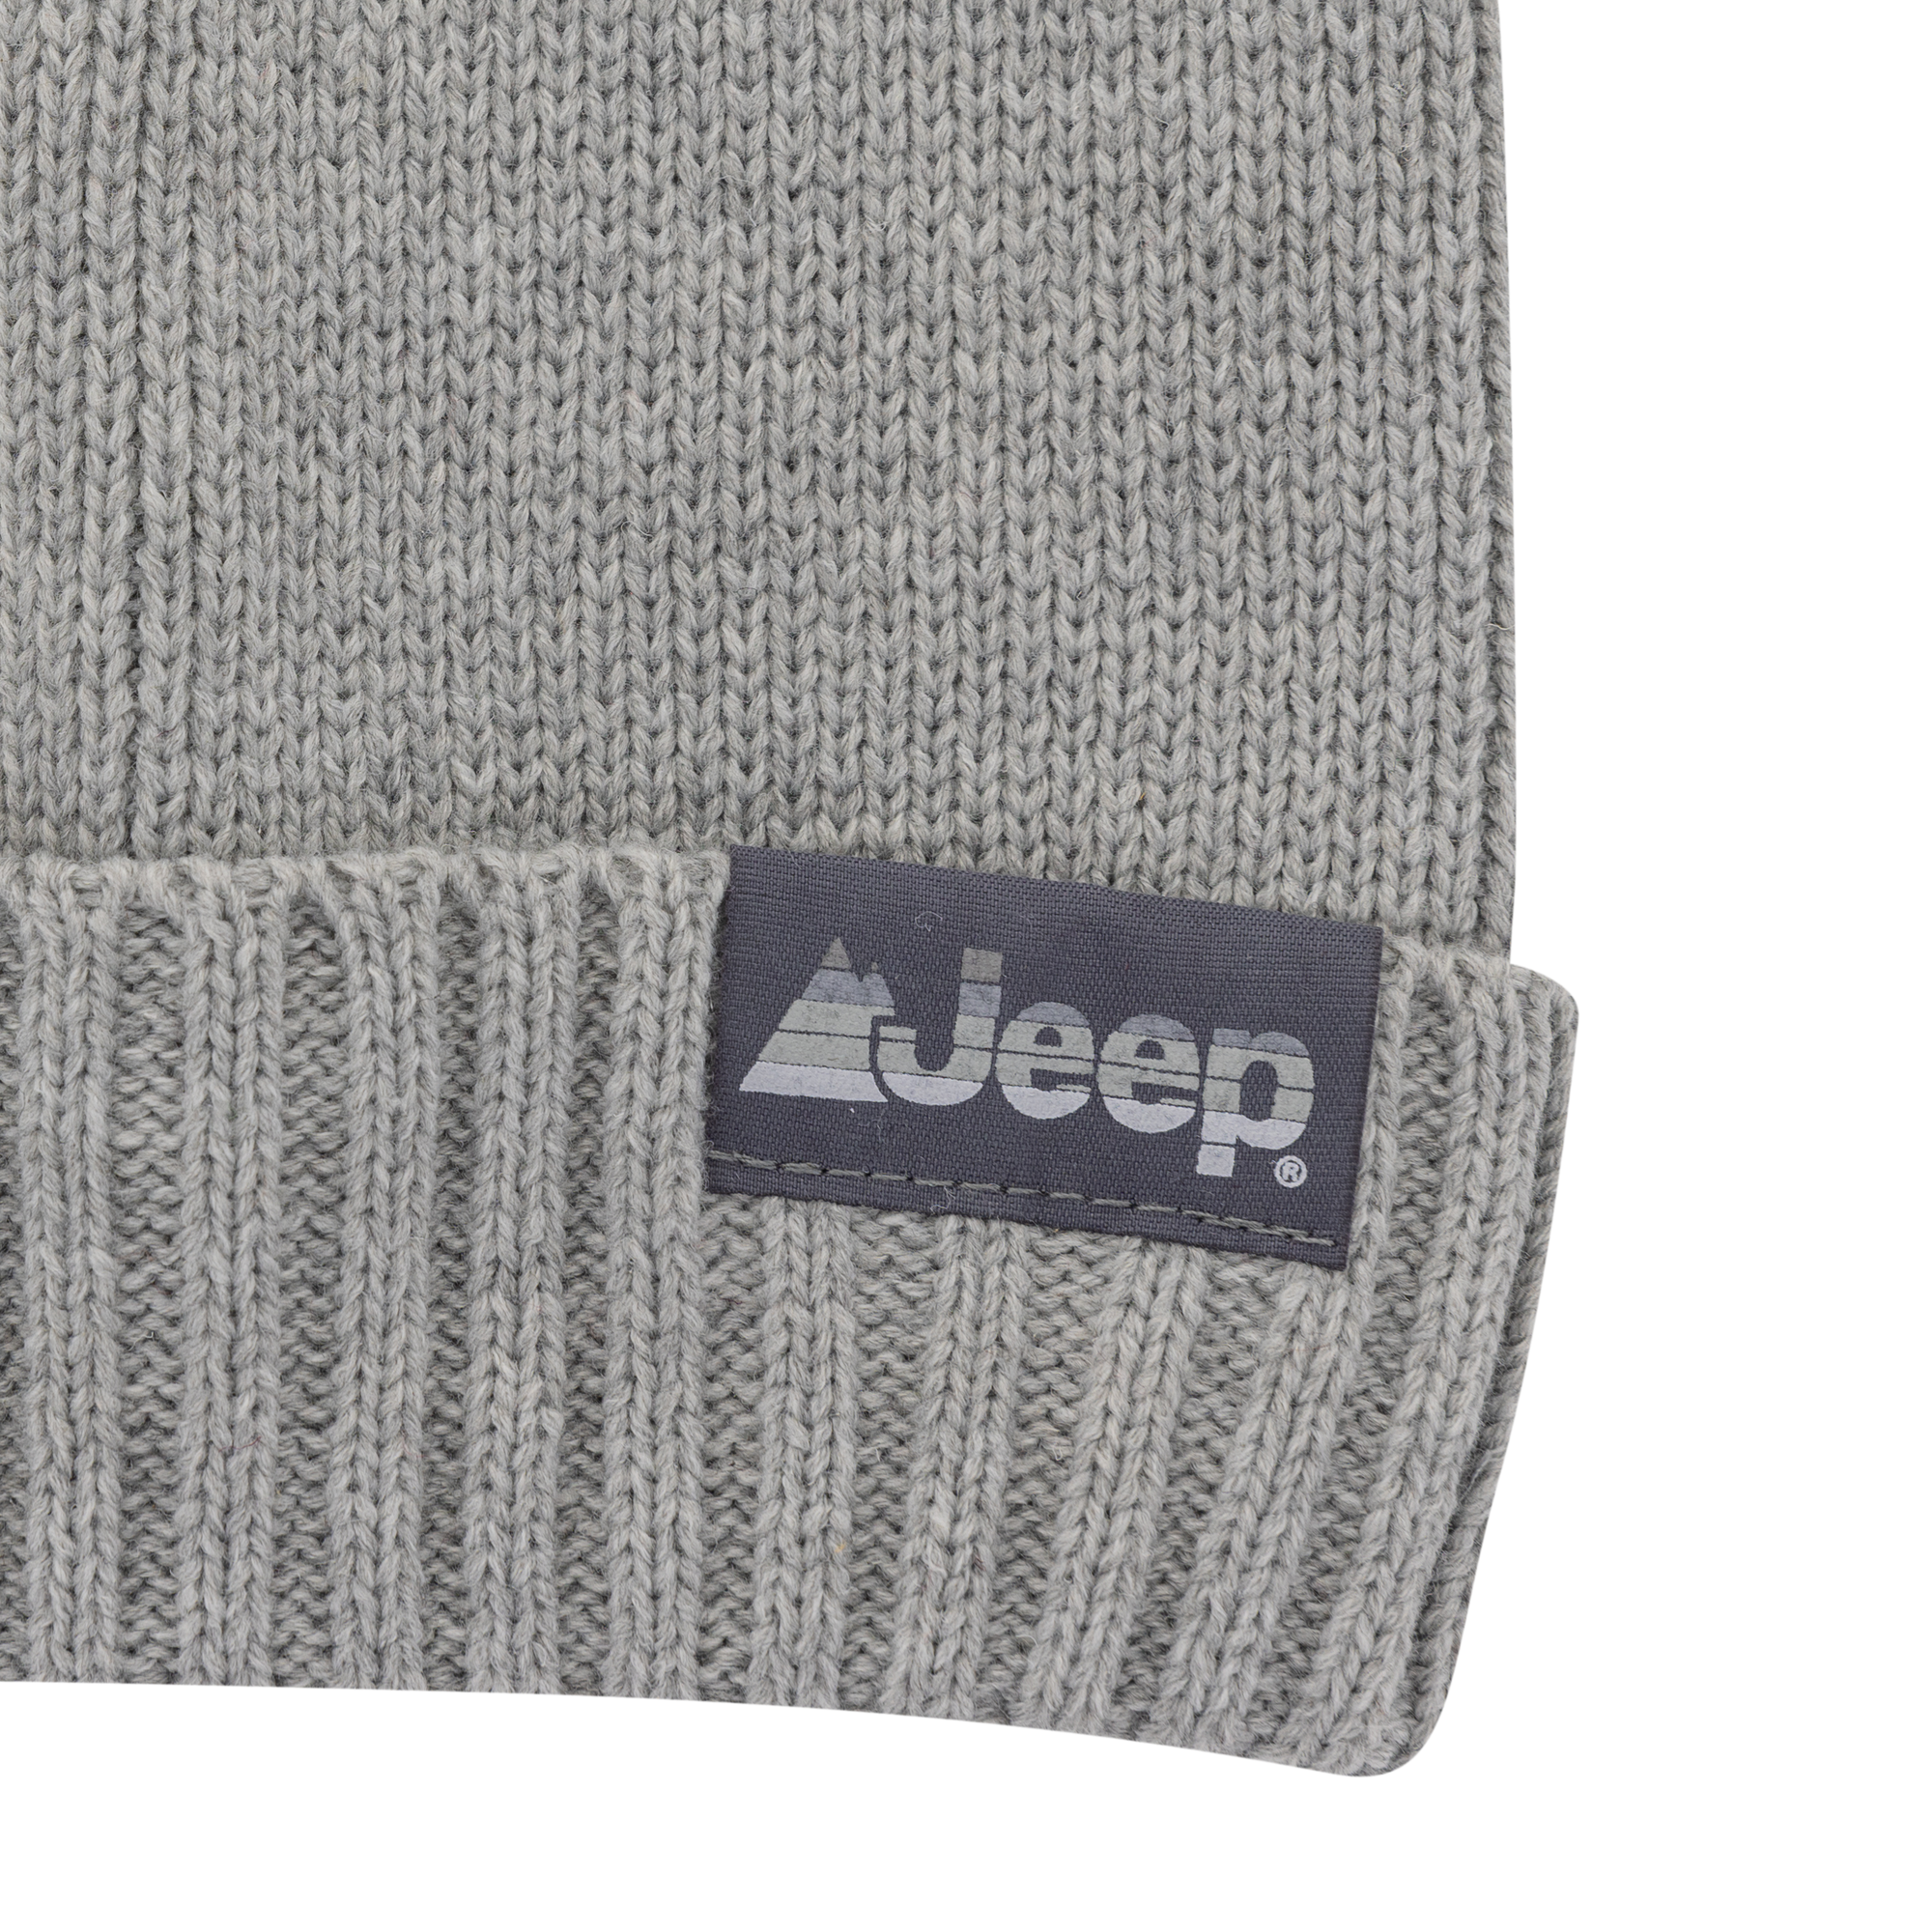 Jeep® 2 Piece Beanie and Convertible Glove Set – Loops & Wales